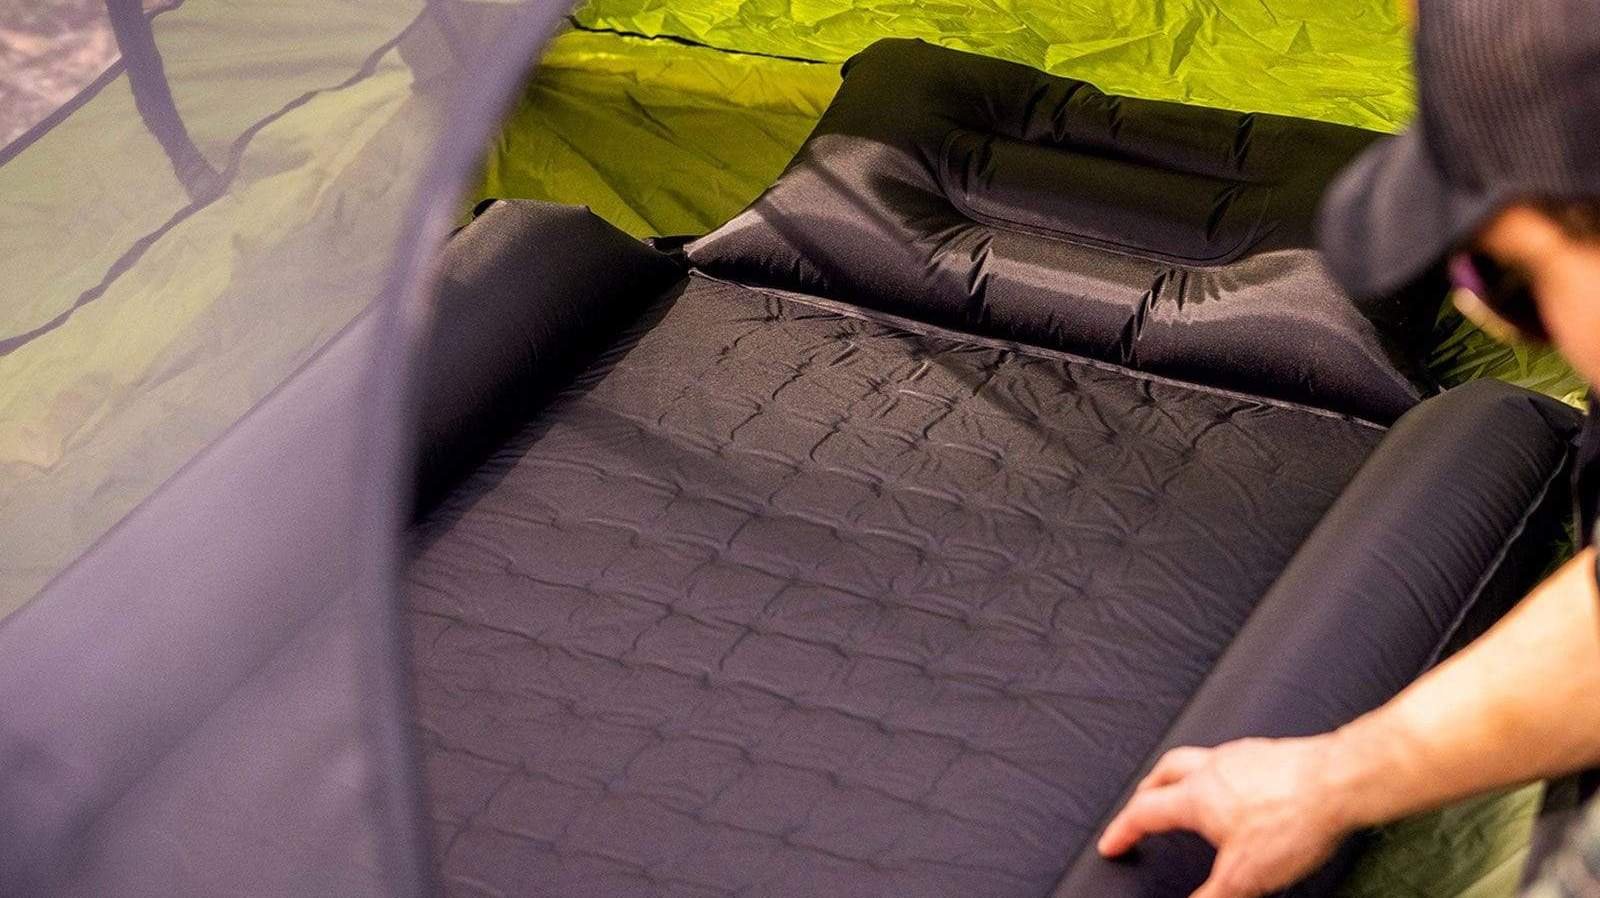 Pelican Outdoor Rugged Sleep Pad self-inflates to keep you comfortable while camping